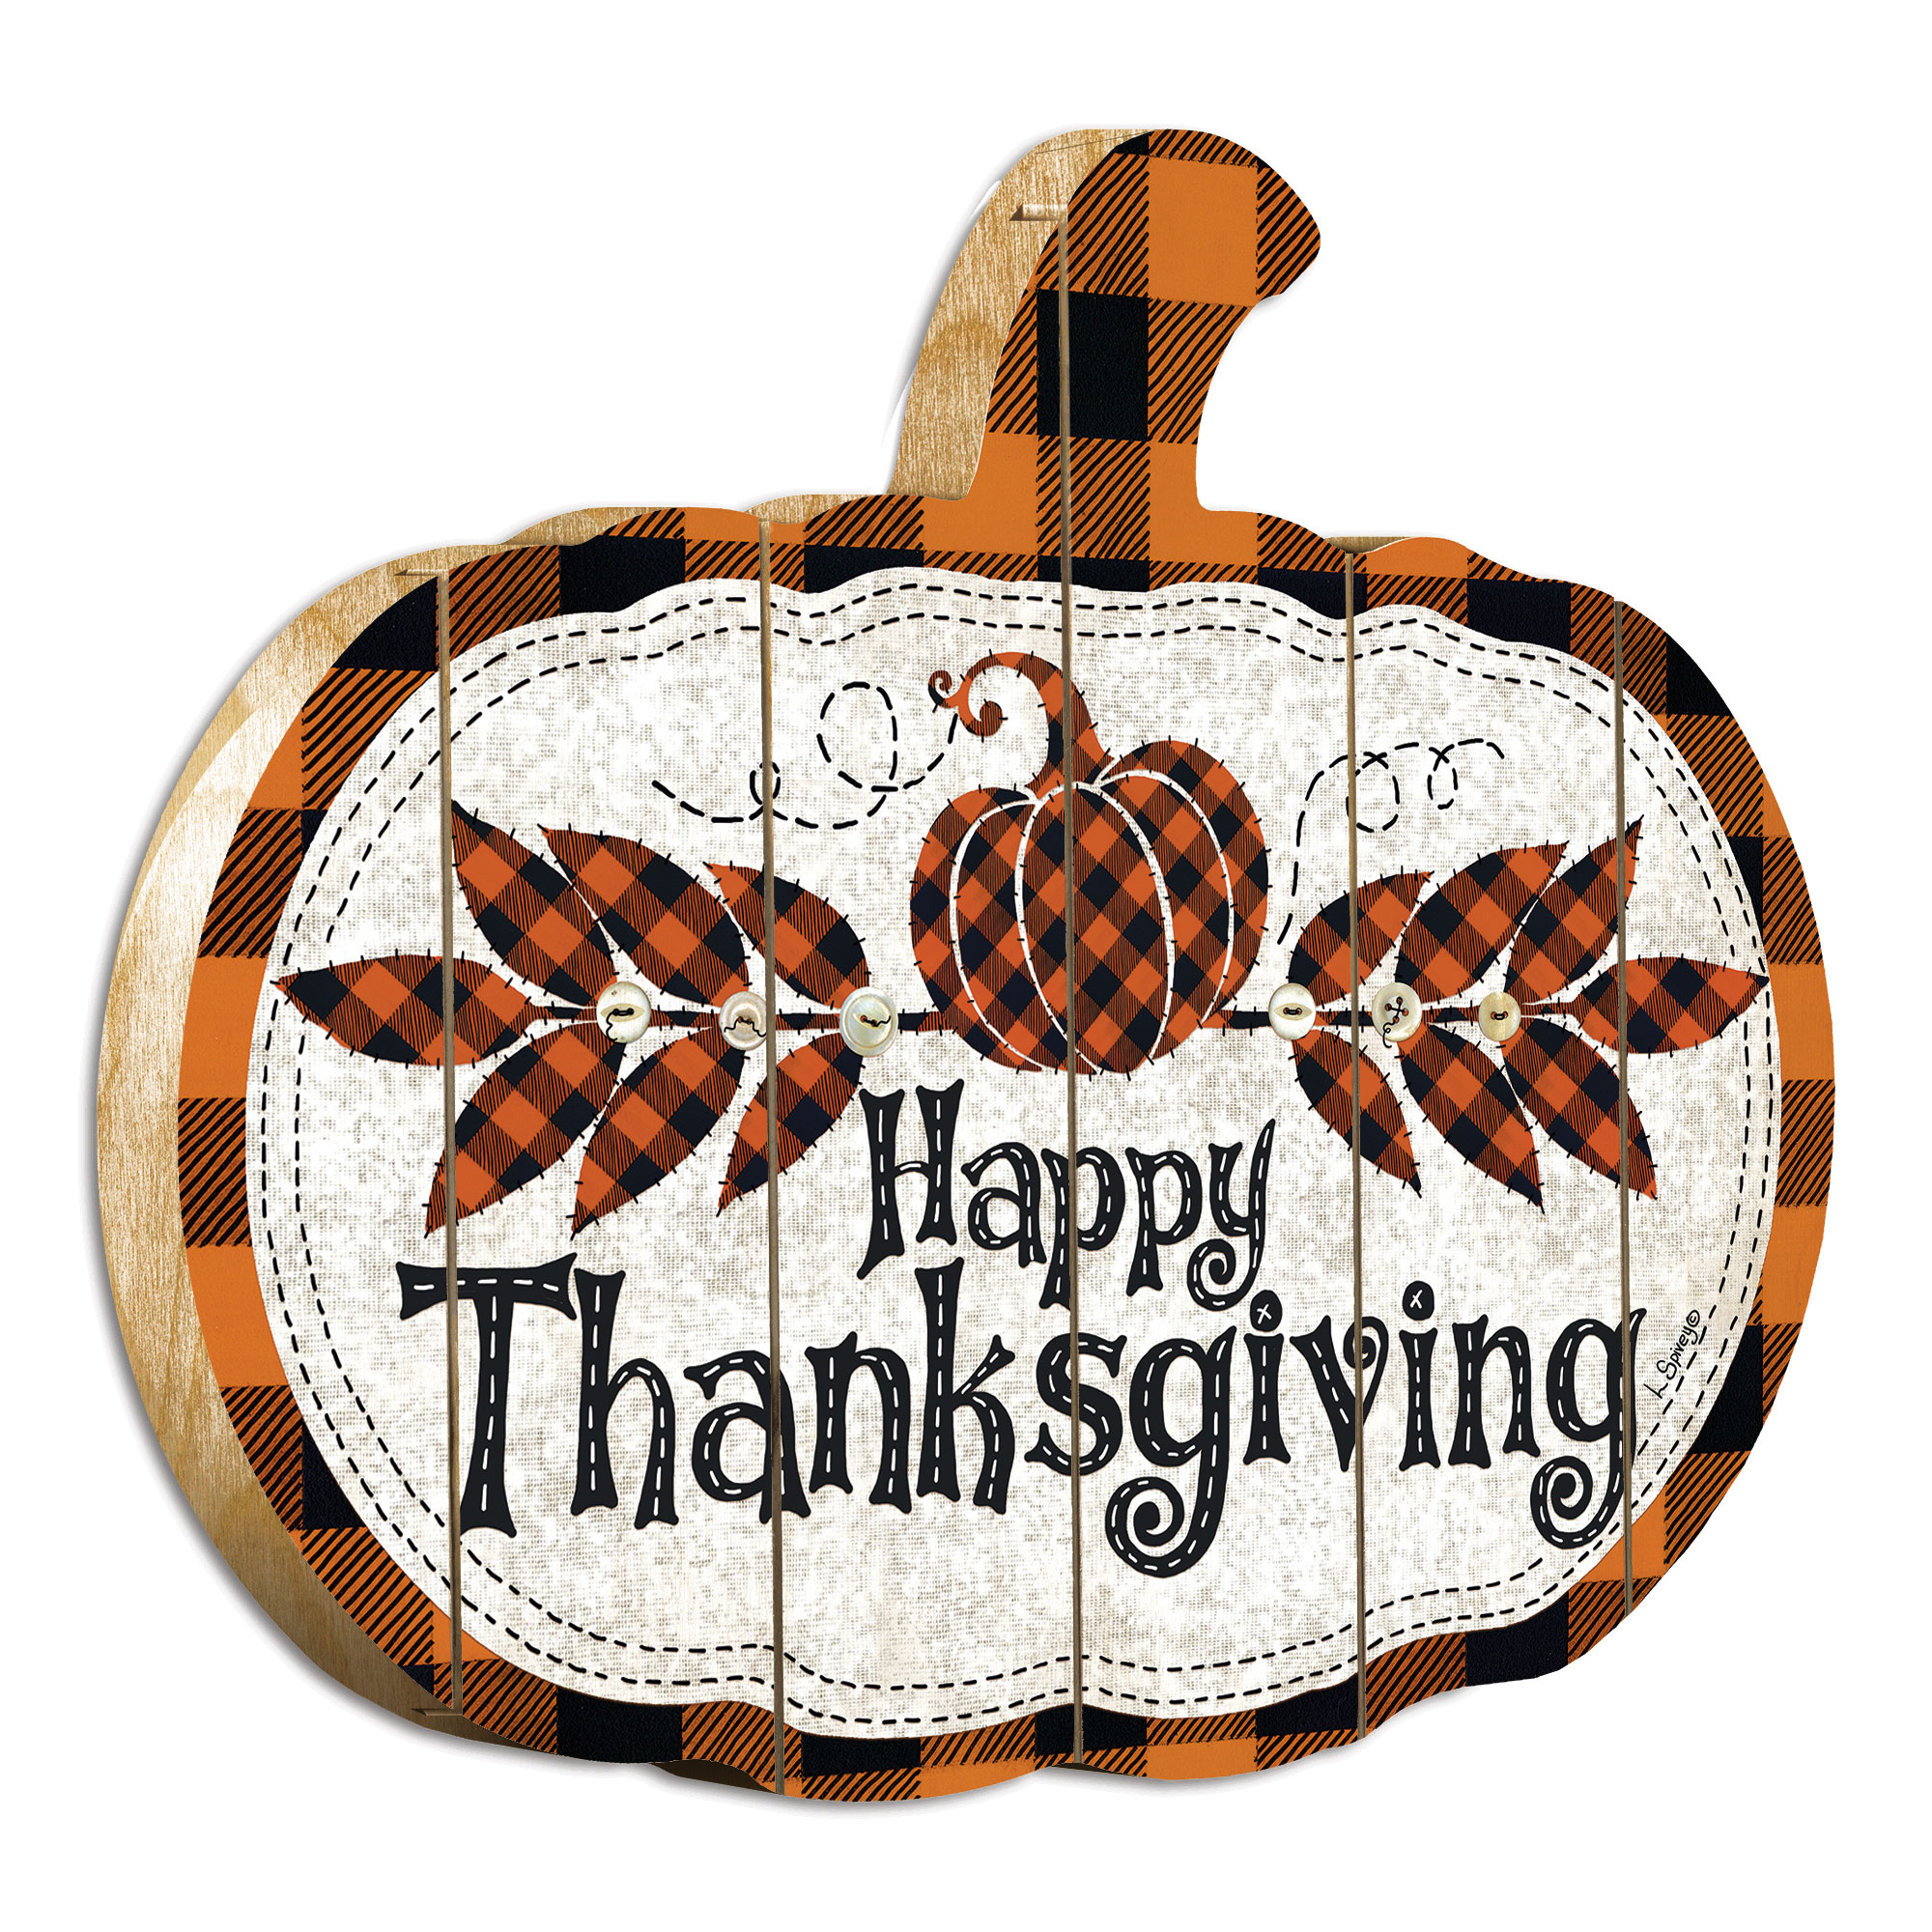 "Happy Thanksgiving" By Artisan Linda Spivey Printed on Wooden Pumpkin Wall Art